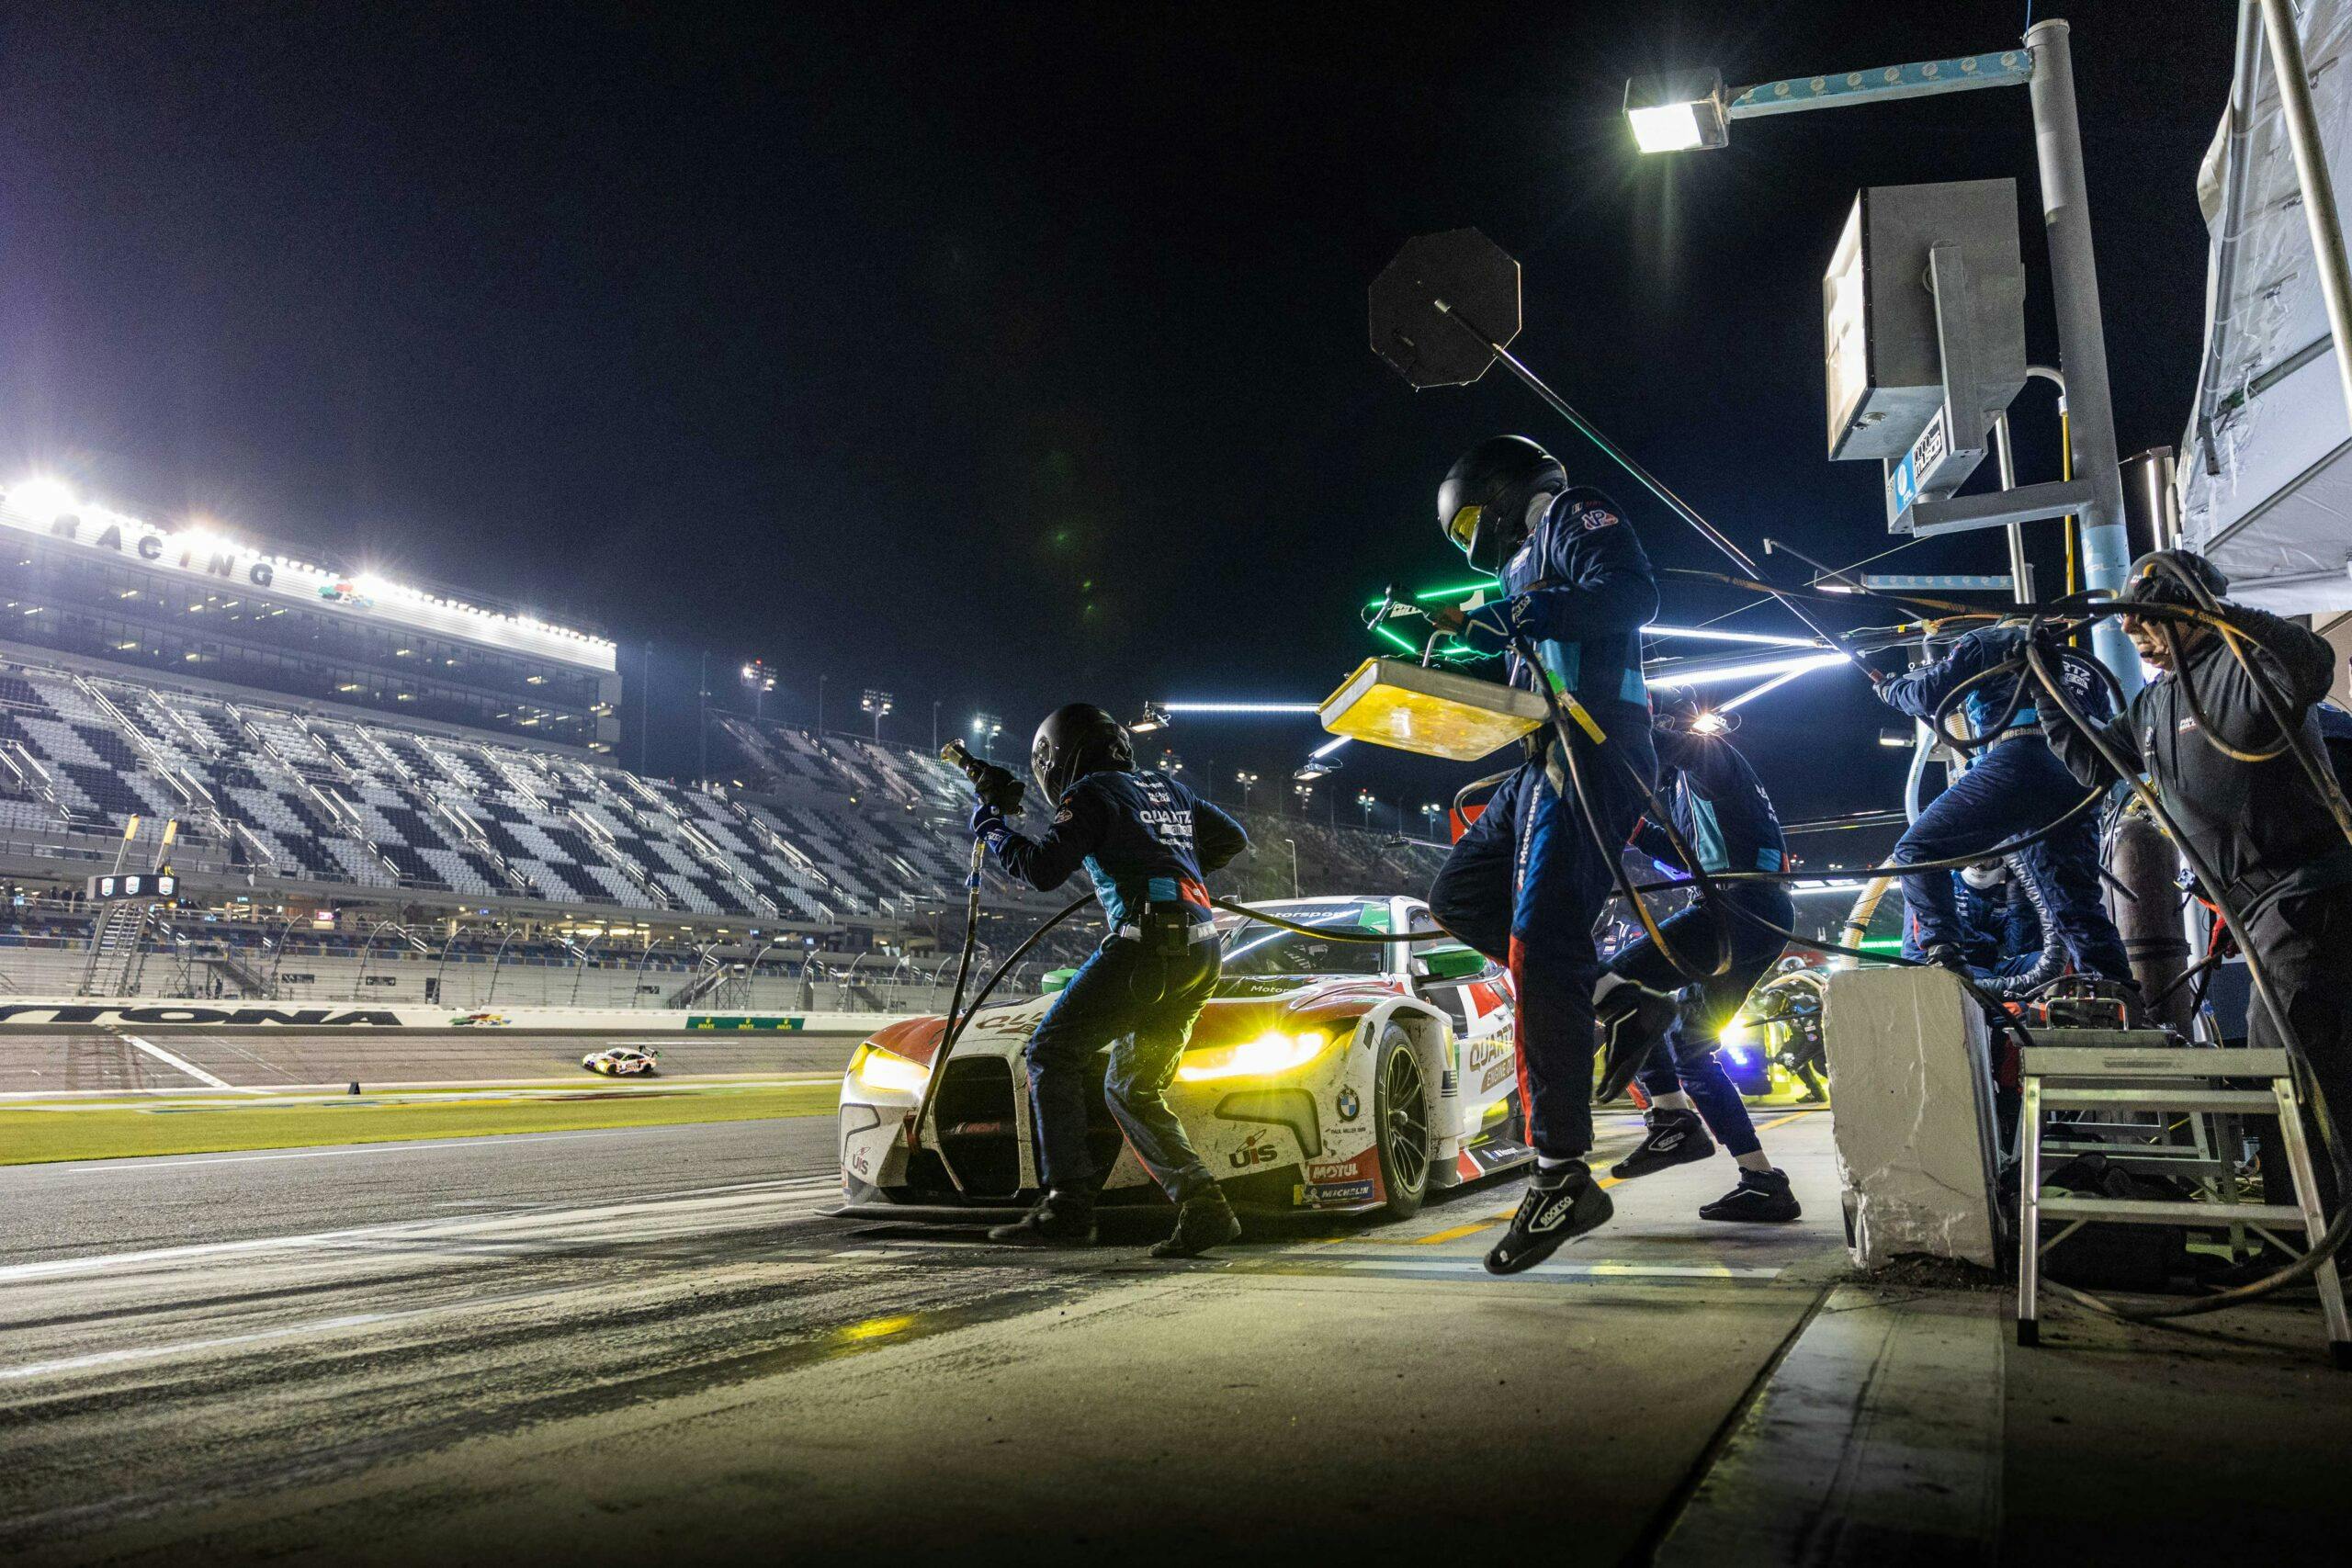 The Paul Miller racing team jumps over the wall to service the BMW M4 GT3 during the 2023 Rolex 24 at Daytona